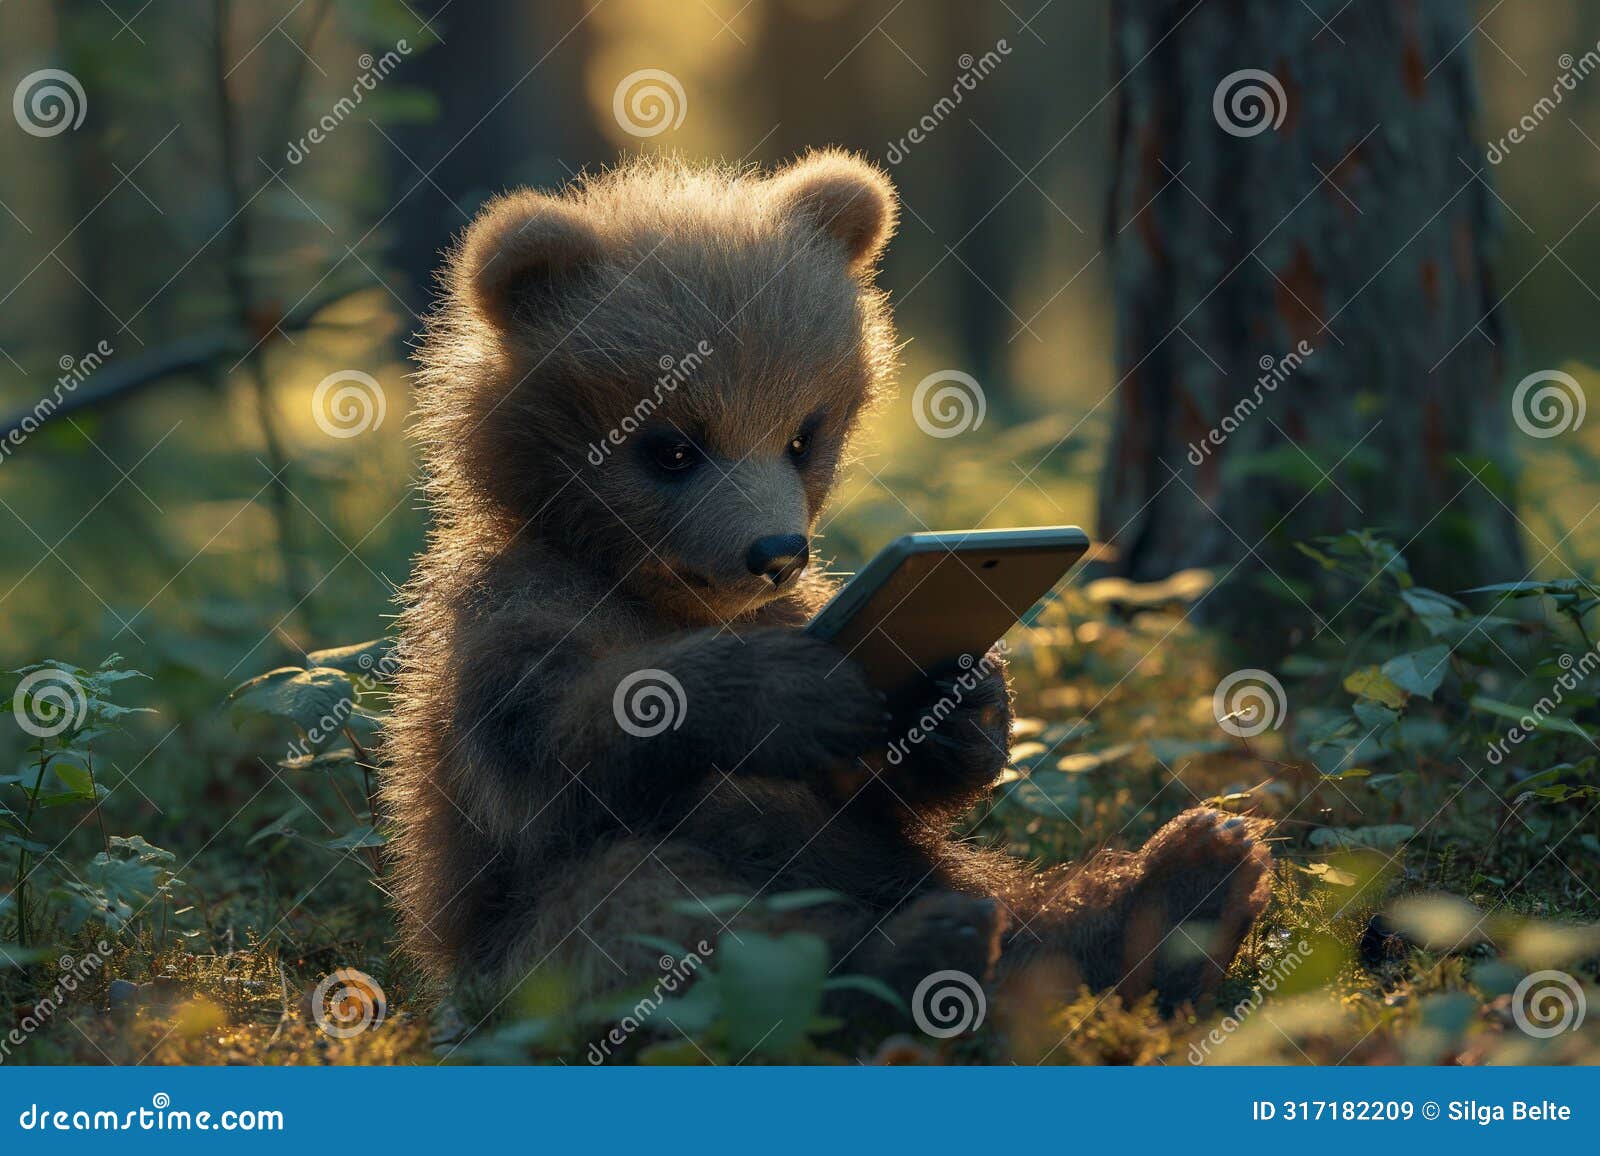 meme. baby bear uses smartphone in sunny forest, presenting a humorous juxtaposition of wildlife and modern